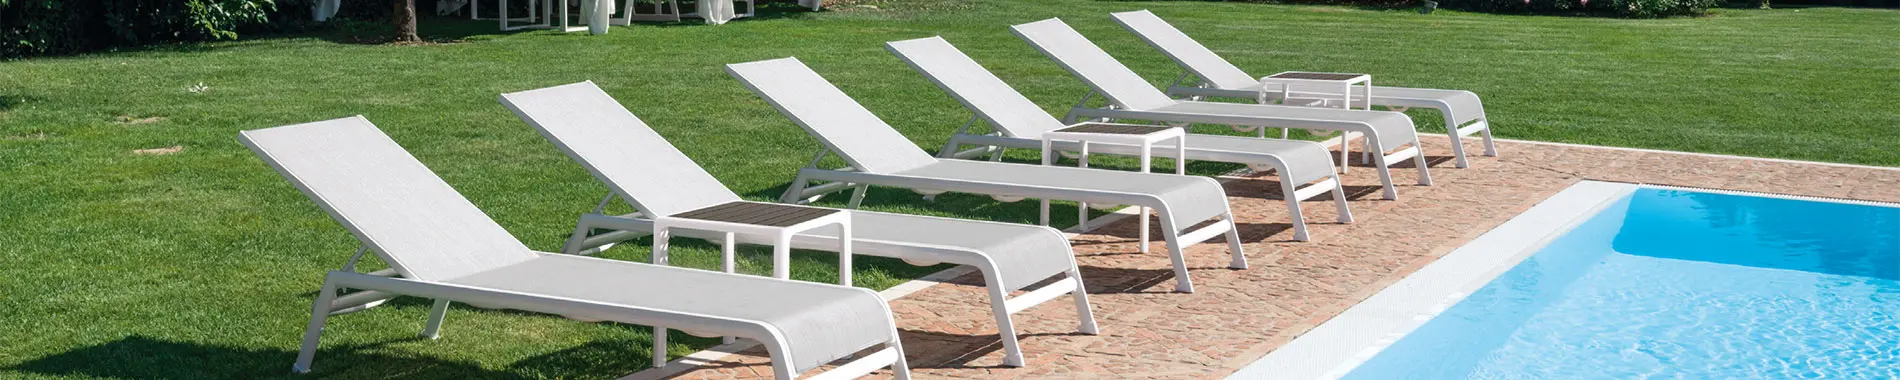 Contral : specialized company in the outdoor furniture business